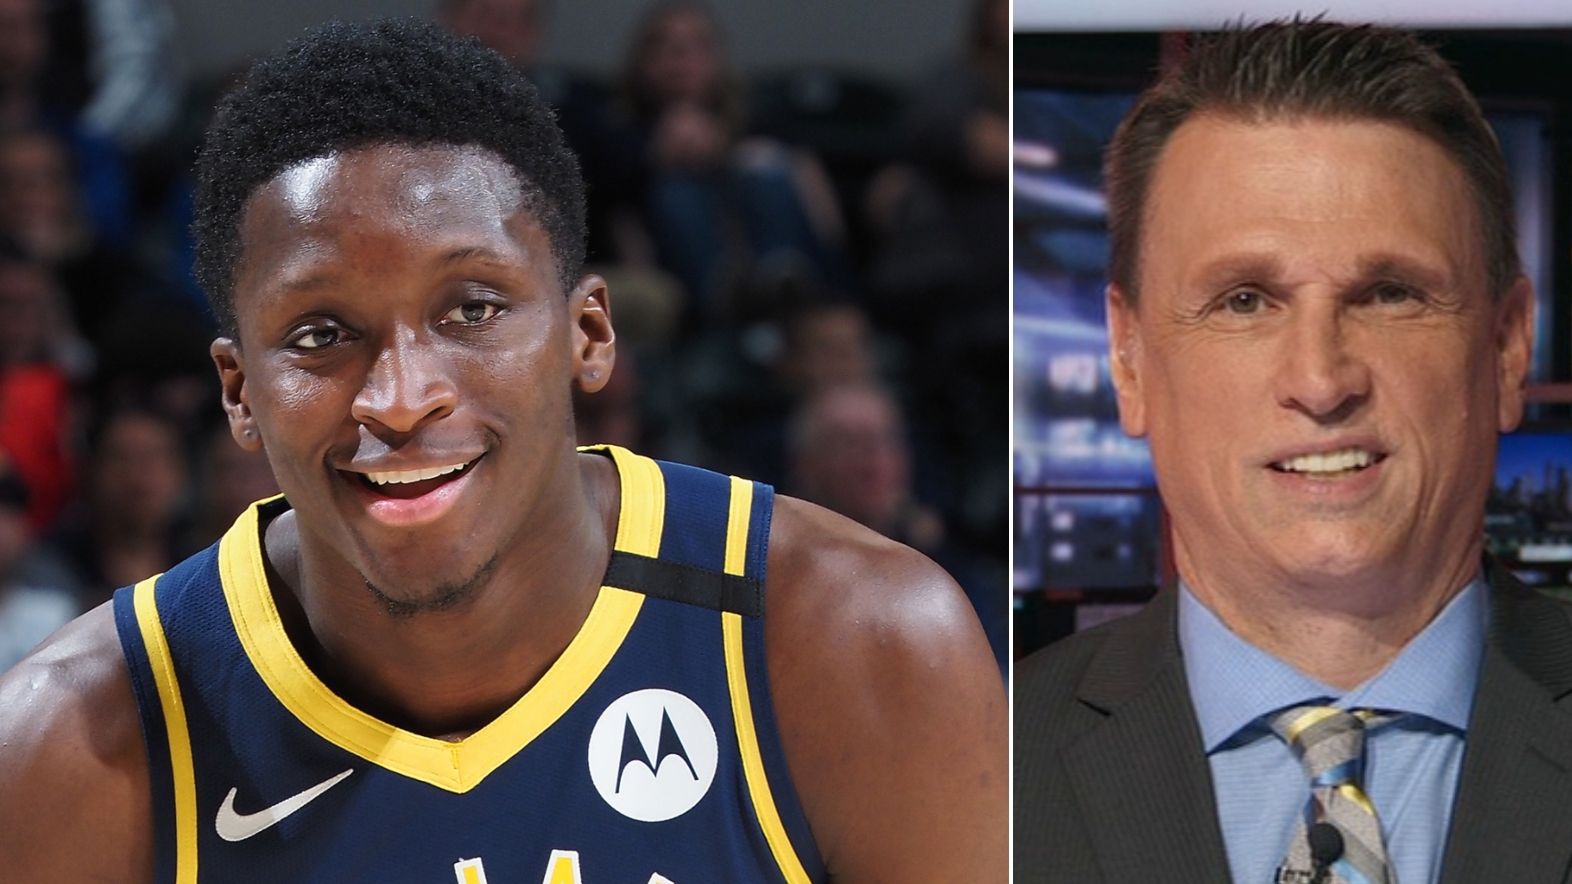 How Oladipo improves the Pacers - ESPN Video